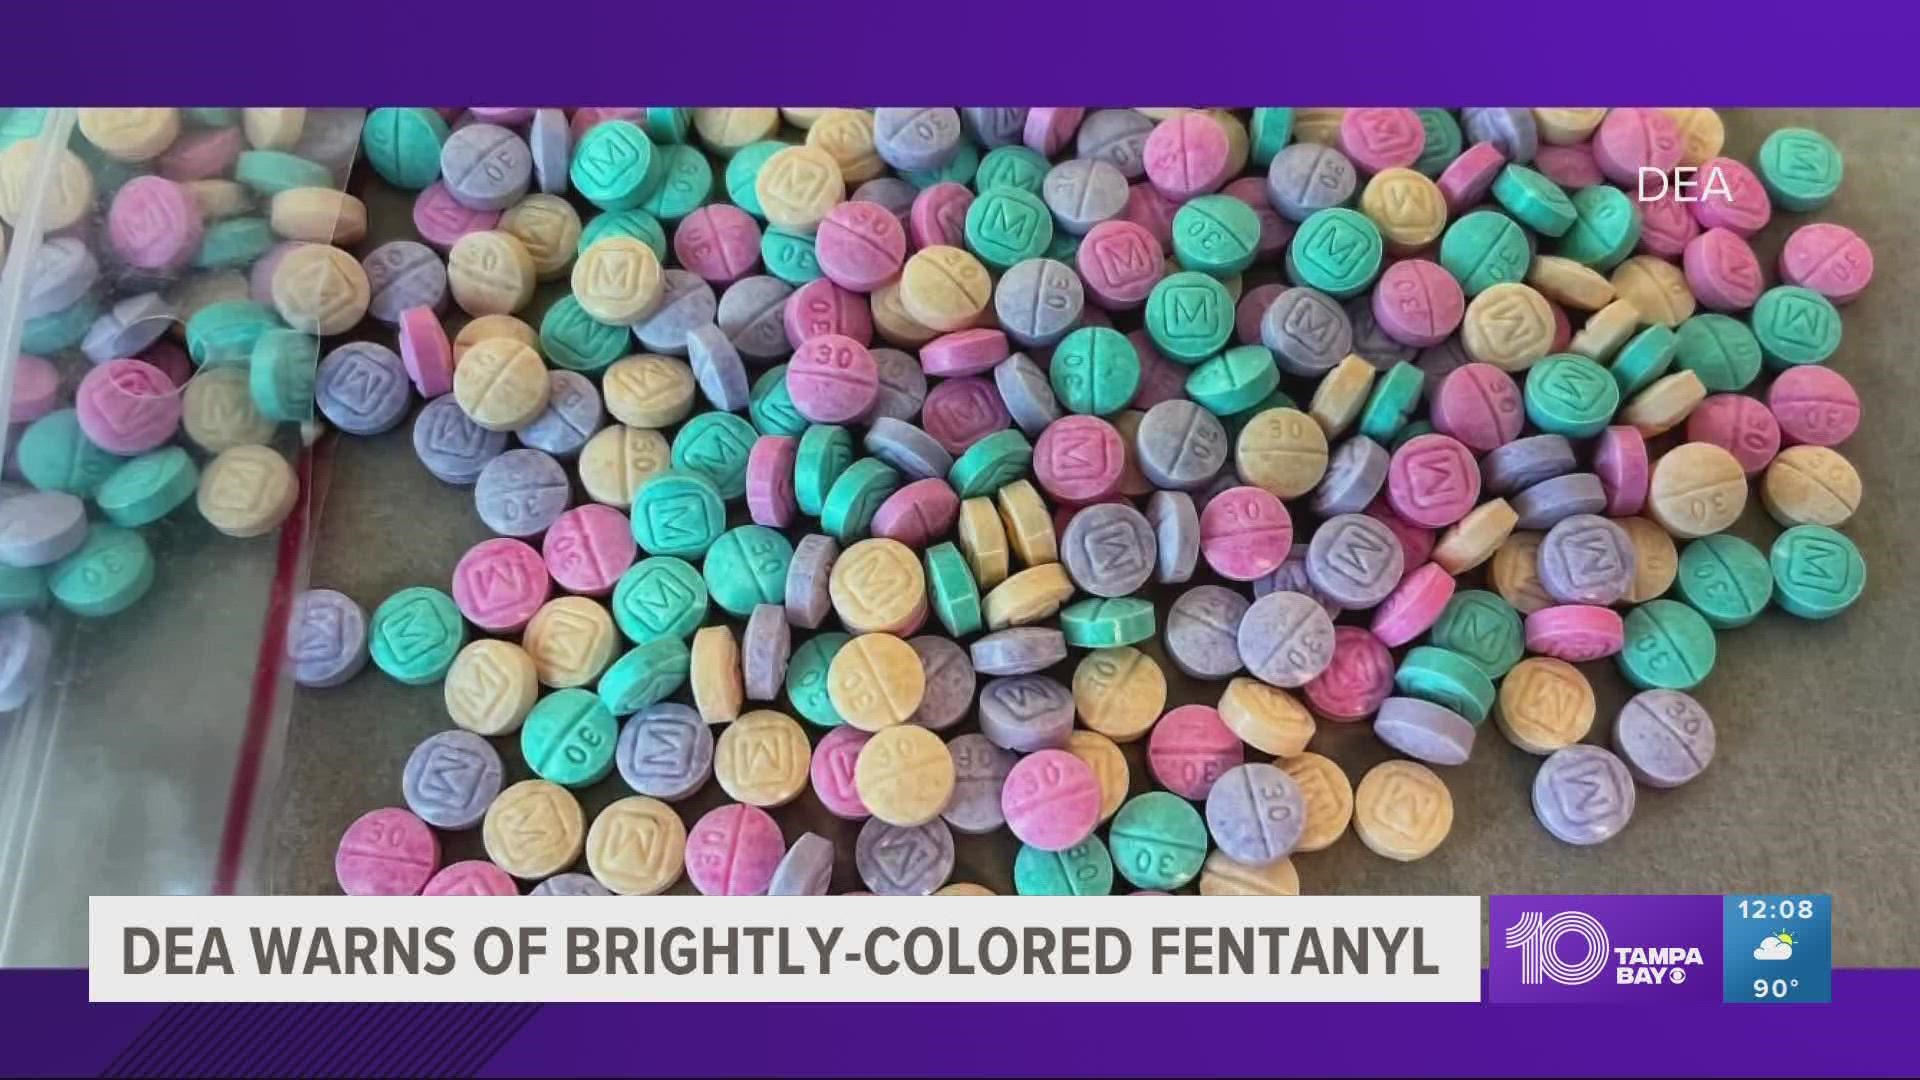 DEA officials are warning the public about "brightly colored fentanyl" pills that are being used to target young Americans.